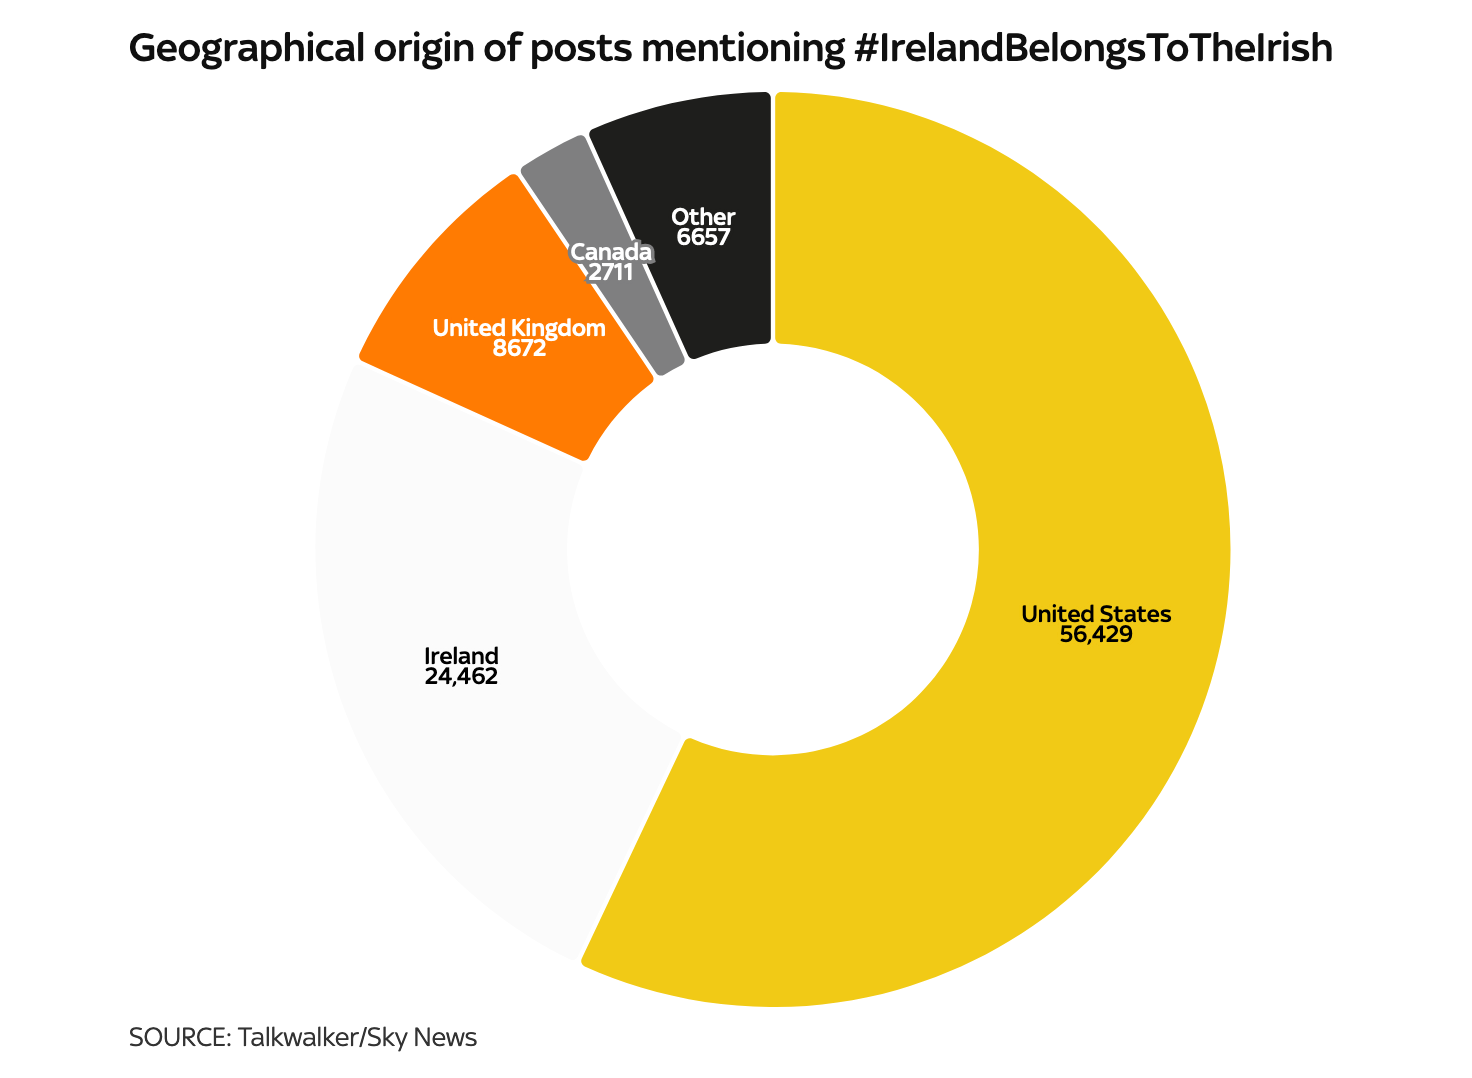 A pie chart showing that the majority of posts using mentioning #IrelandBelongsToTheIrish are coming from outside Ireland, with more than half from the US.